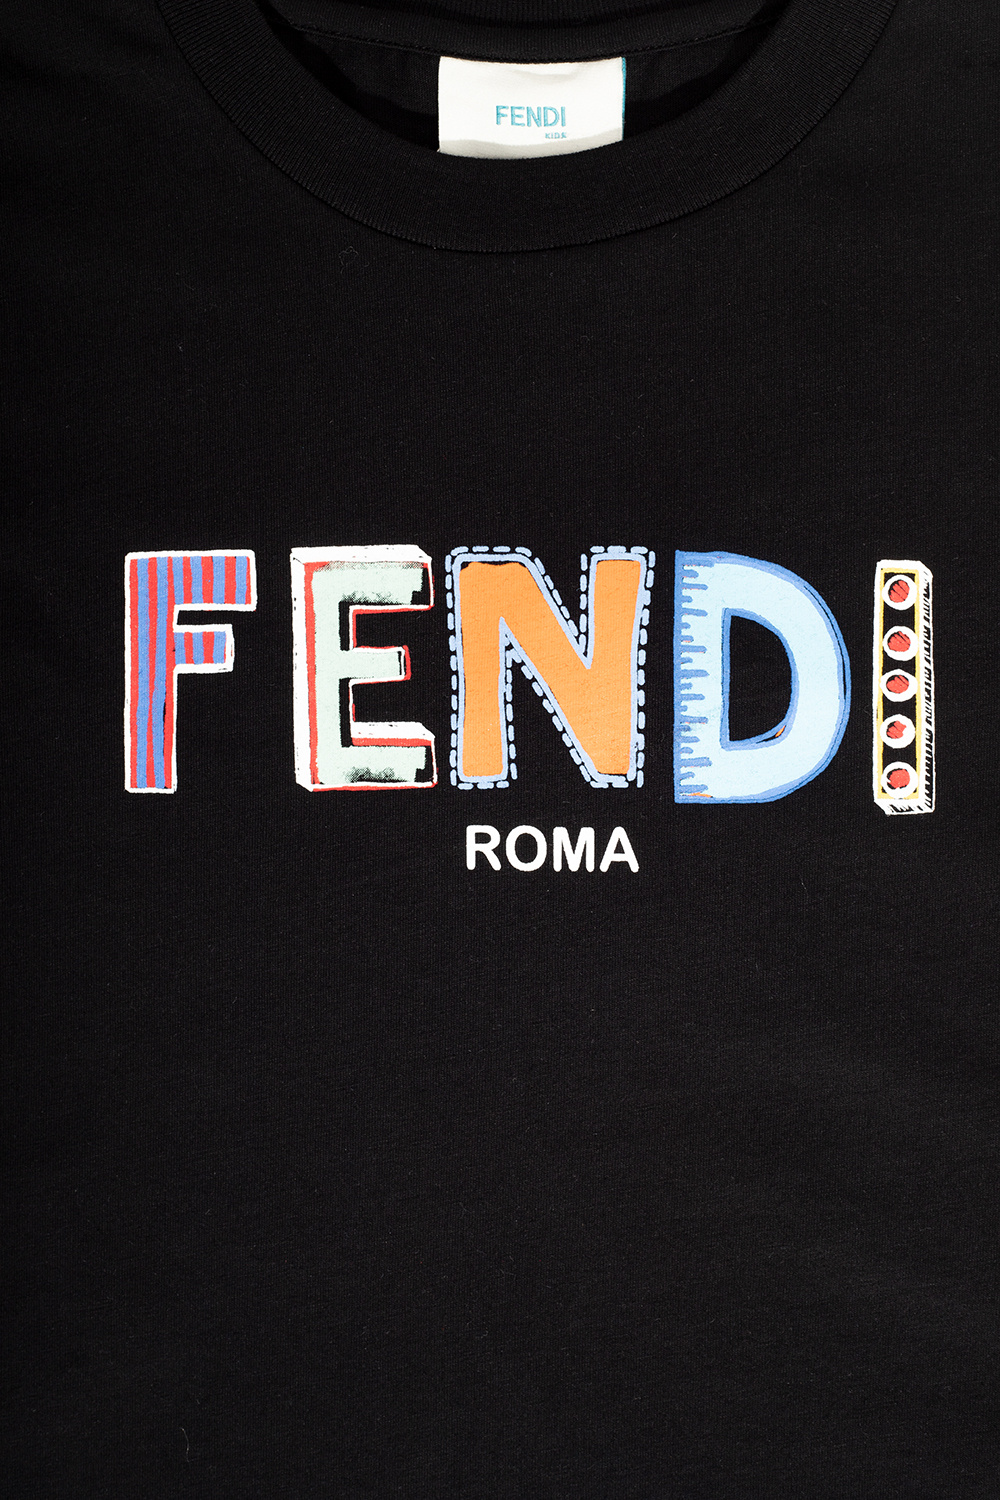 Fendi Kids the mix of dress and casual shown in September at Fendi s co-ed spring 21 show